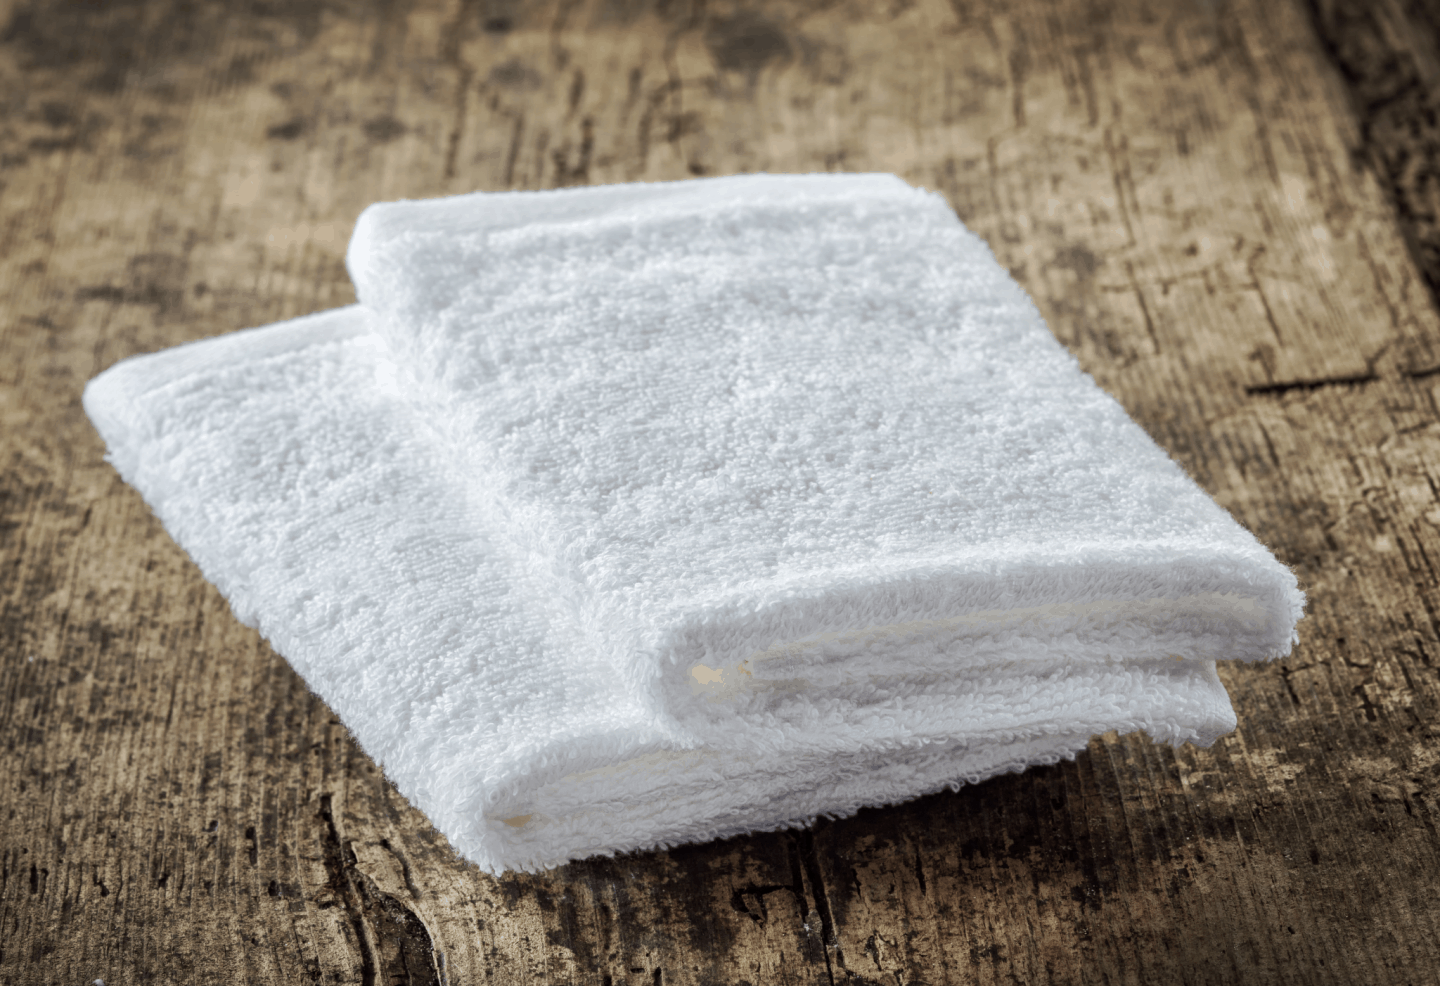 a pair of white washcloths as sustainable alternatives to plastic sponges